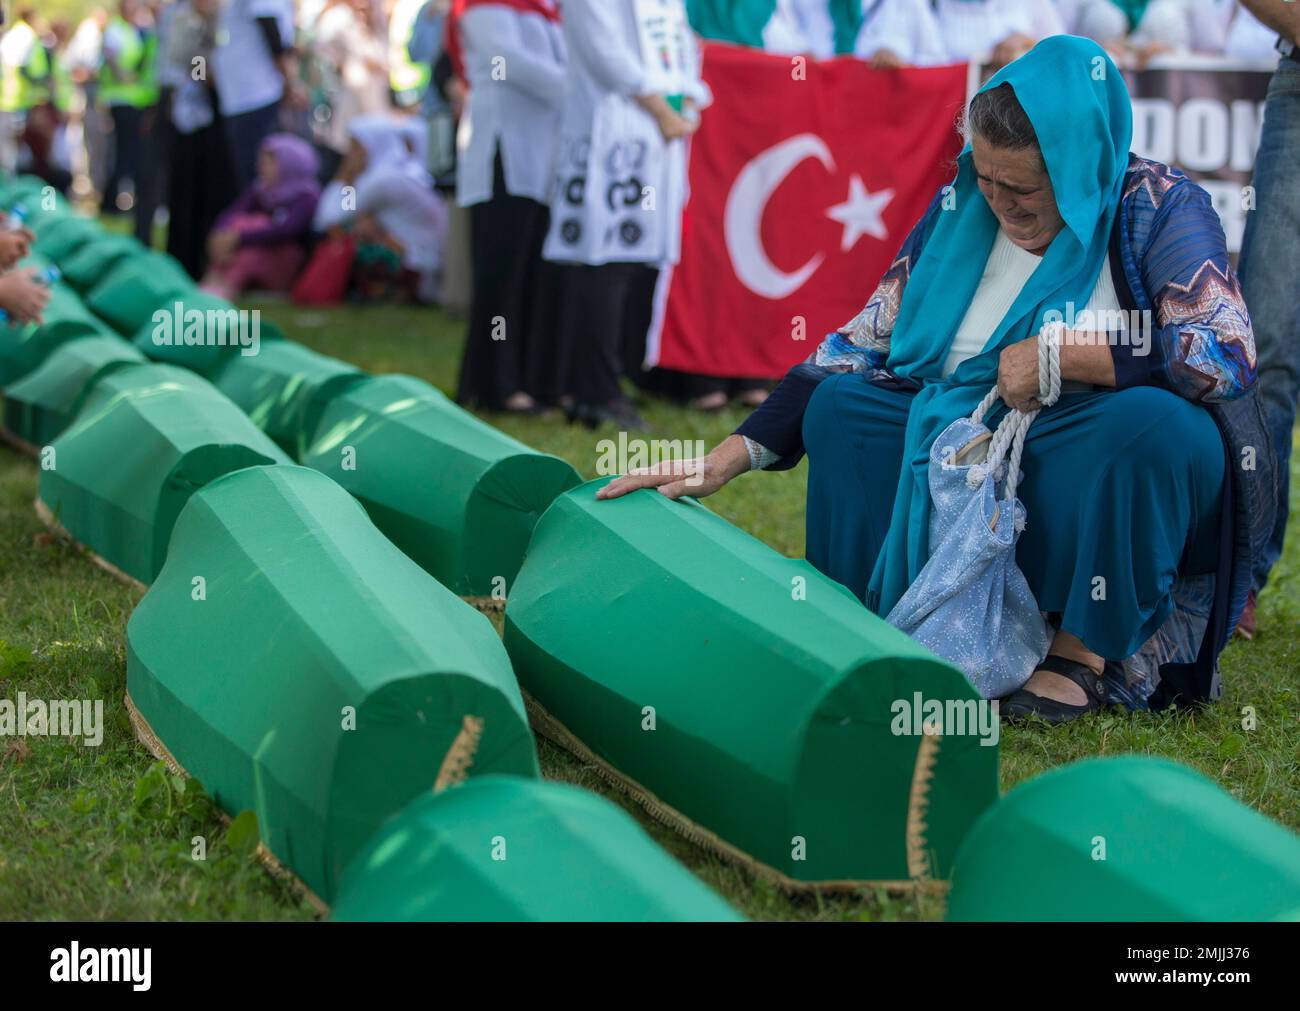 A woman mourns next to the coffins in Potocari near Srebrenica, Bosnia, Thursday, July 11, 2019. The remains of the 33 victims of Srebrenica massacre will be buried 24 years after Serb troops overran the eastern Bosnian Muslim enclave of Srebrenica and executed some 8,000 Muslim men and boys, which international courts have labeled as an act of genocide. (AP Photo/Darko Bandic) Stockfoto